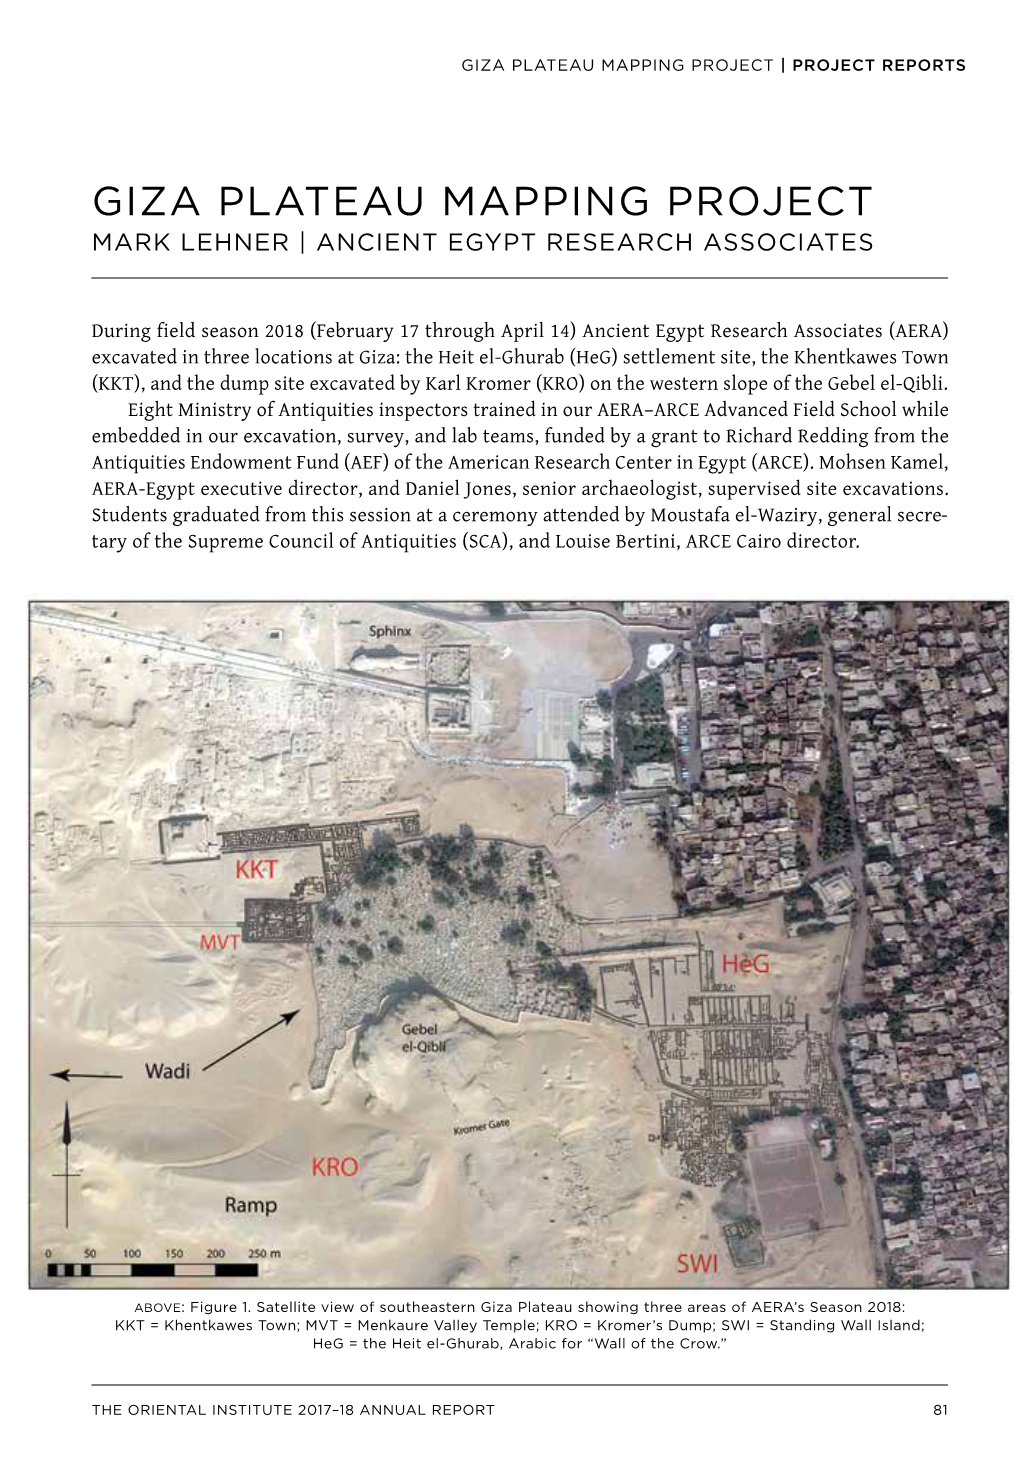 Giza Plateau Mapping Project. Mark Lehner